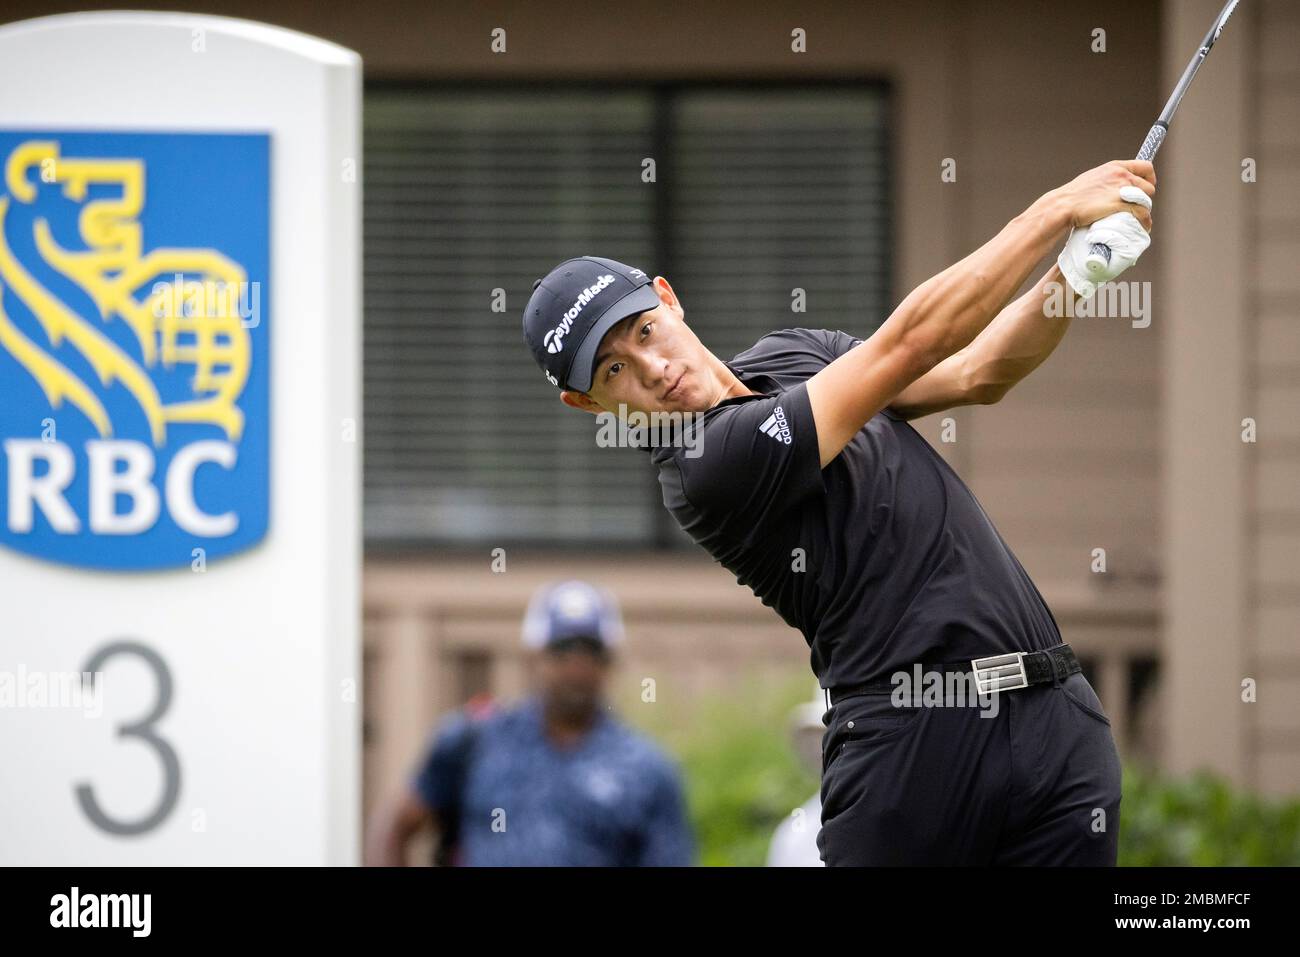 Collin Morikawa hits on from the third tee during the third round of the RBC Heritage golf tournament, Saturday, April 16, 2022, in Hilton Head Island, S.C